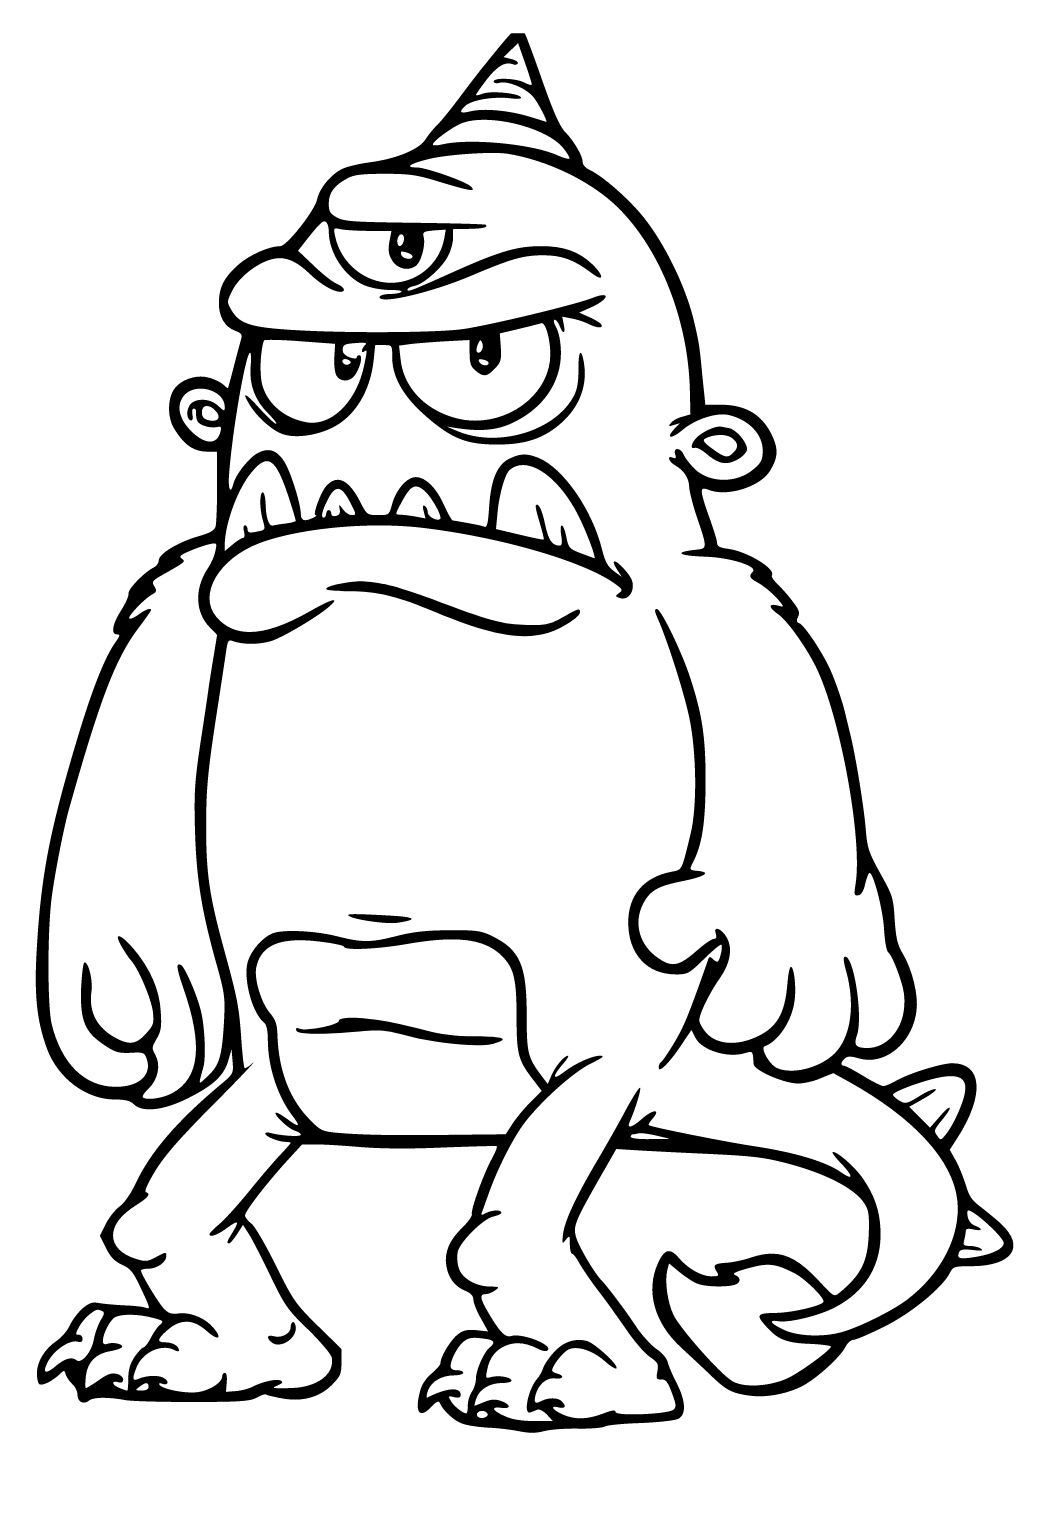 Free printable monster funny coloring page for adults and kids